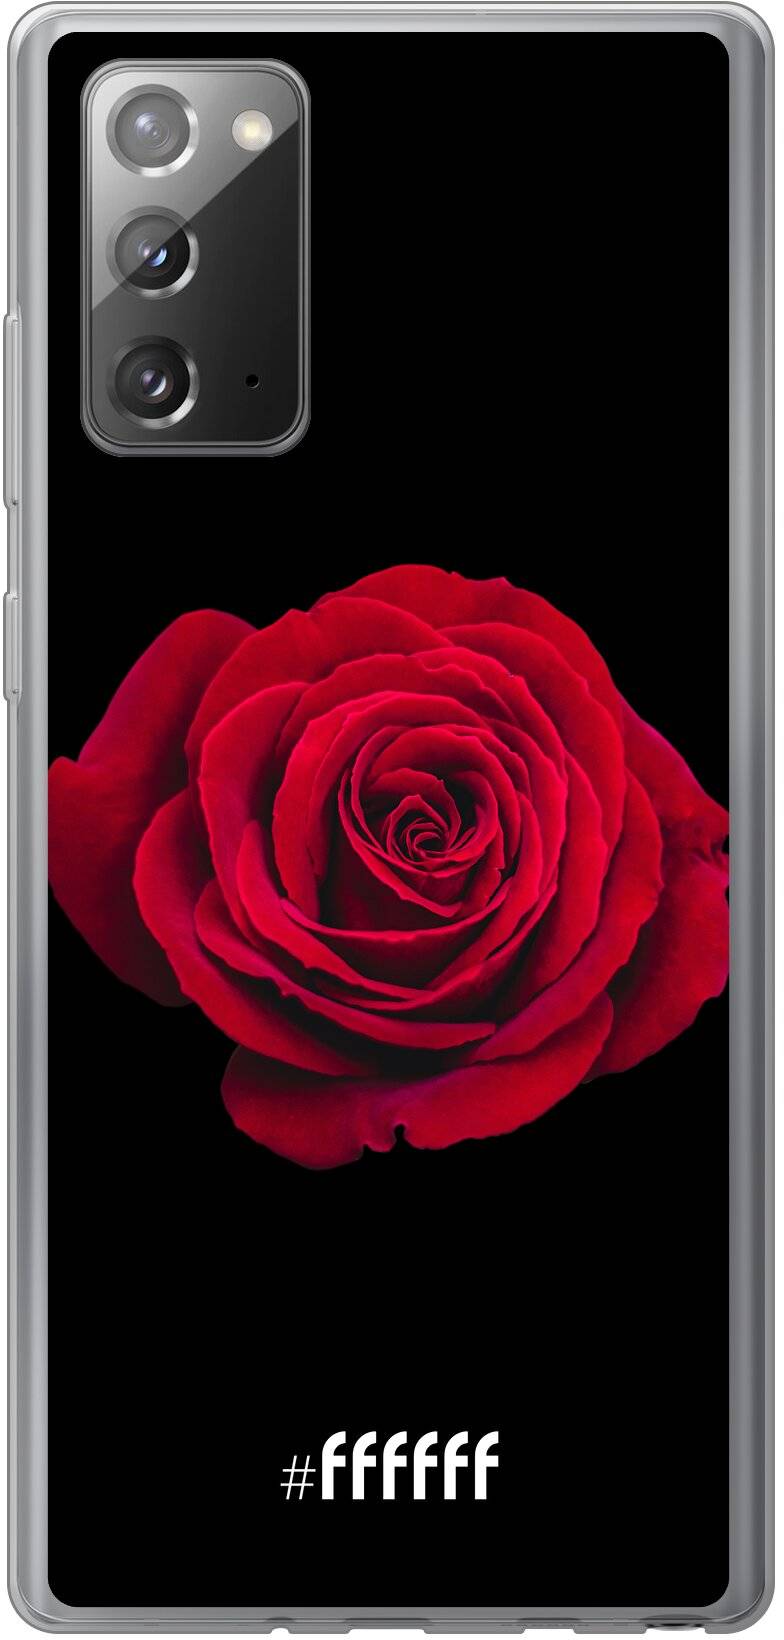 Radiant Rose Galaxy Note 20